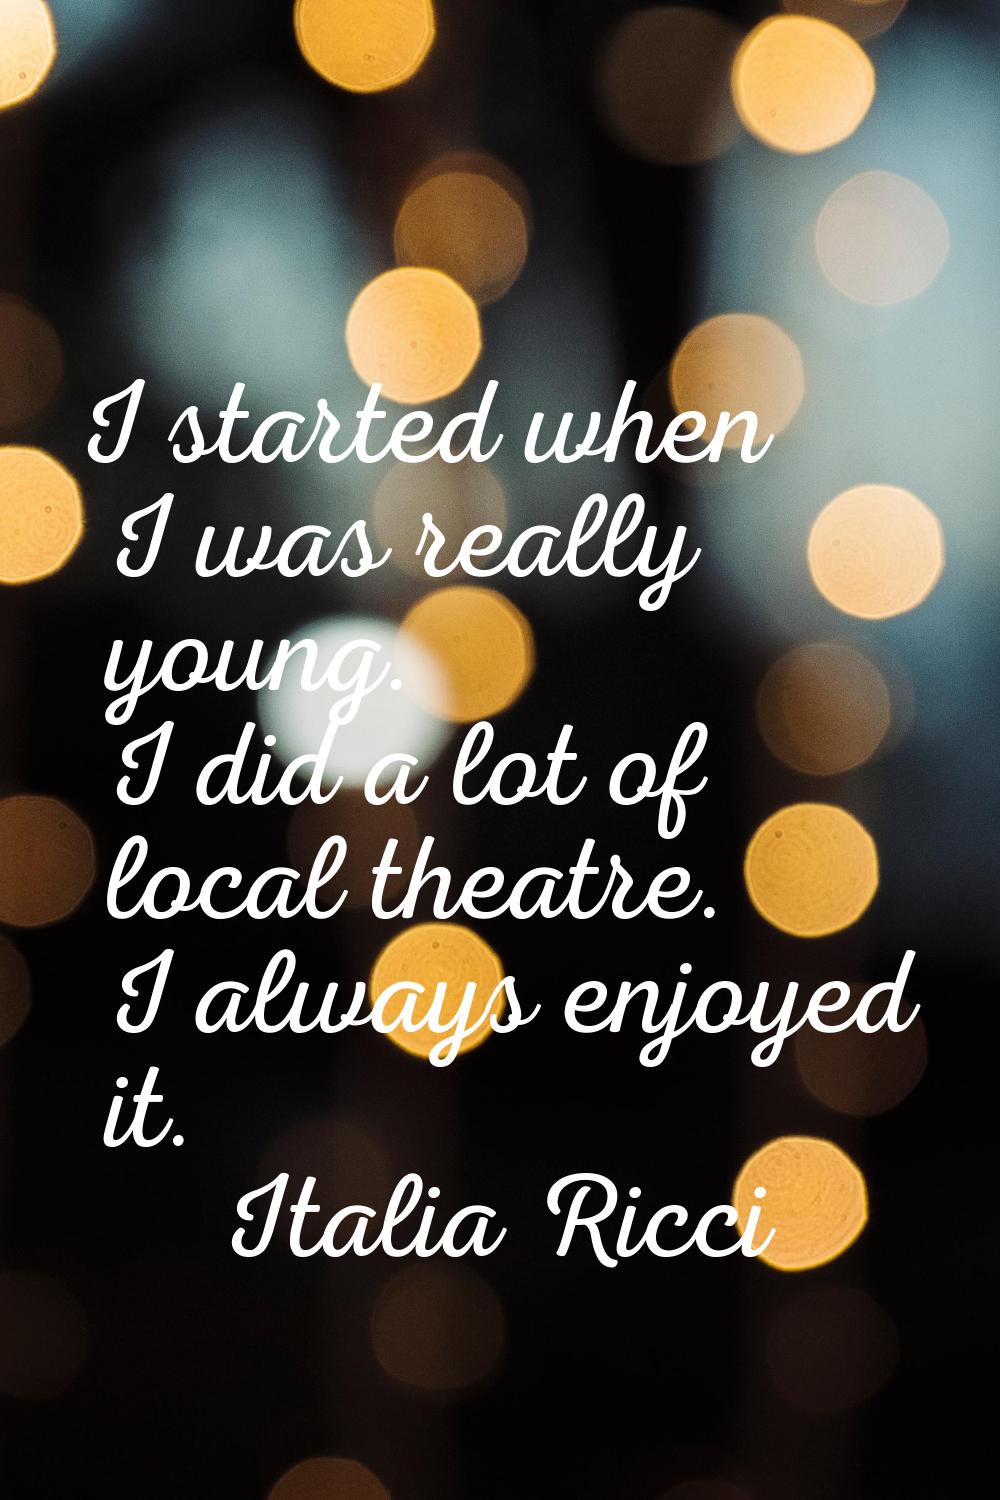 I started when I was really young. I did a lot of local theatre. I always enjoyed it.